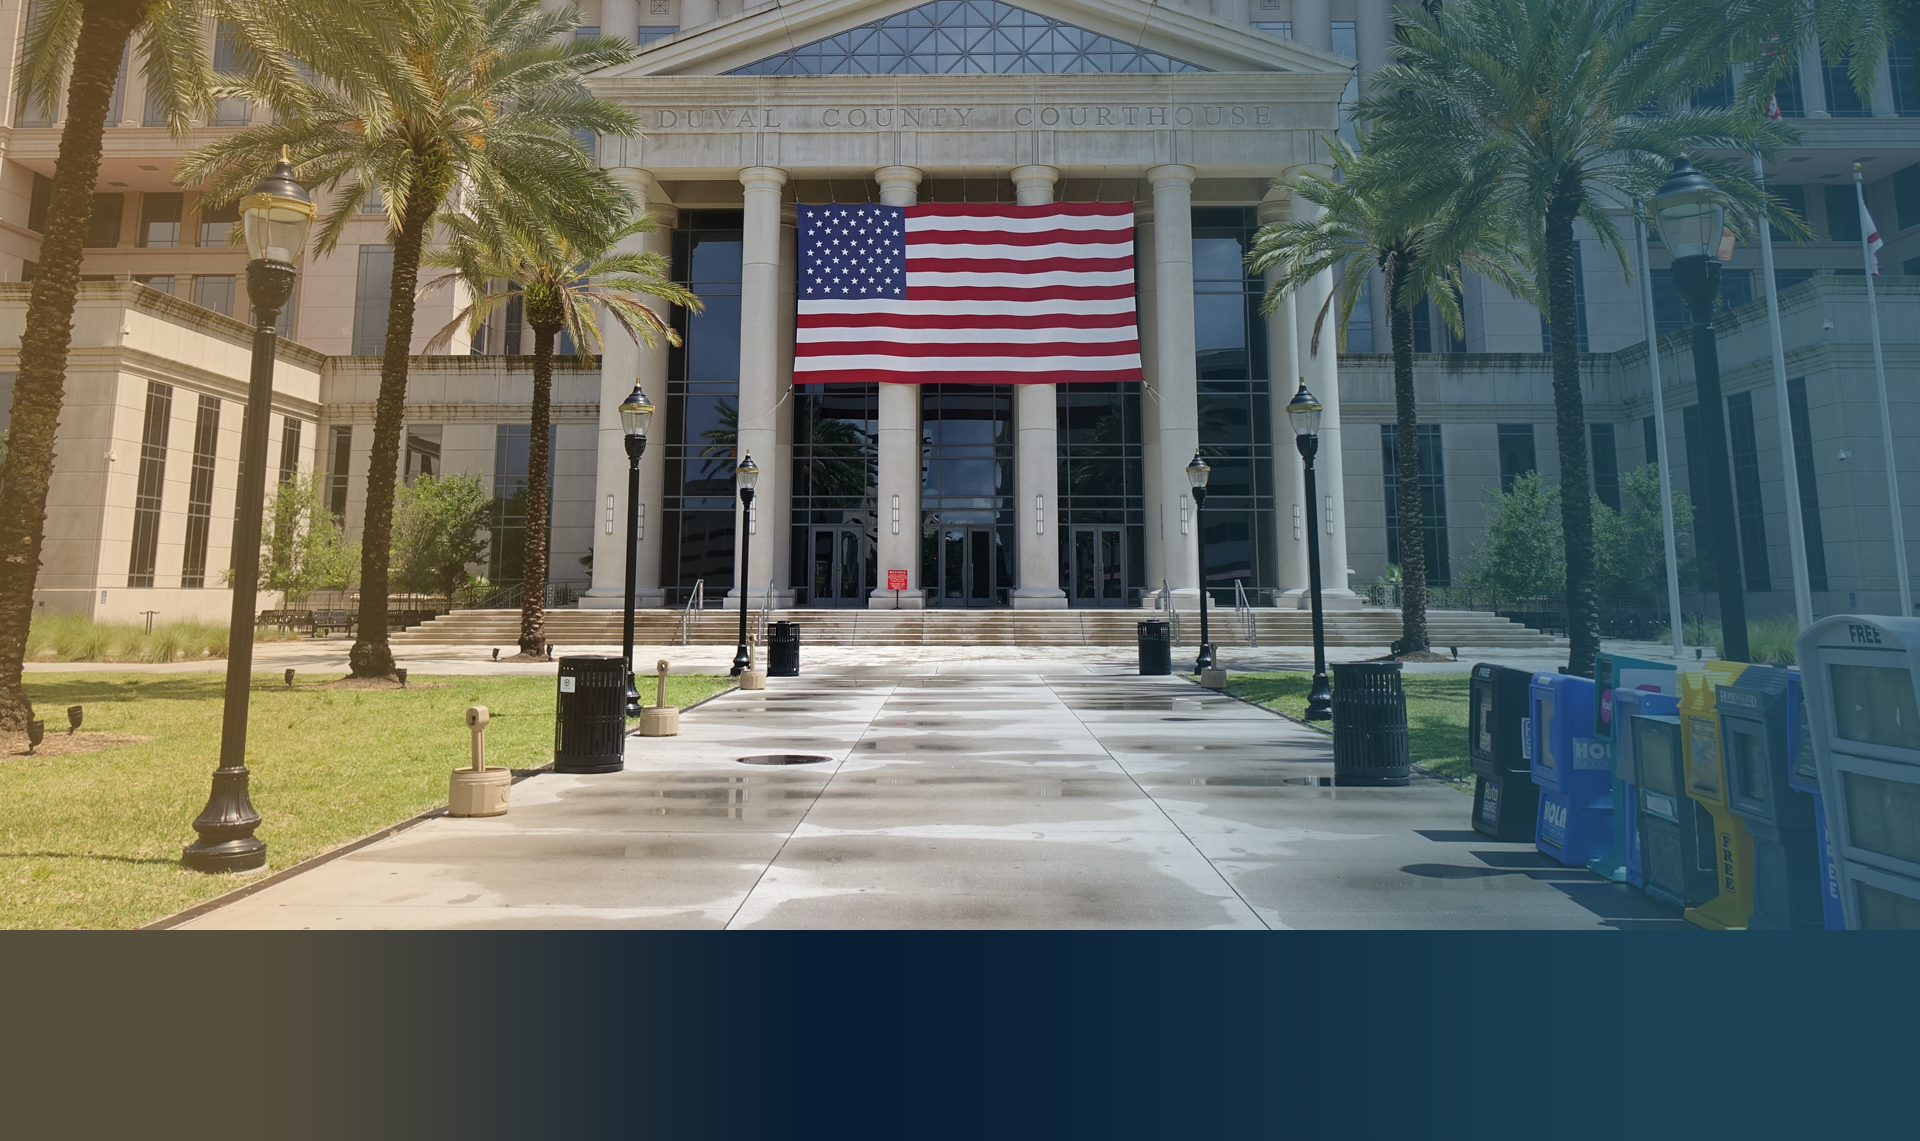 U.S. Flag in front of Duval County Courthouse